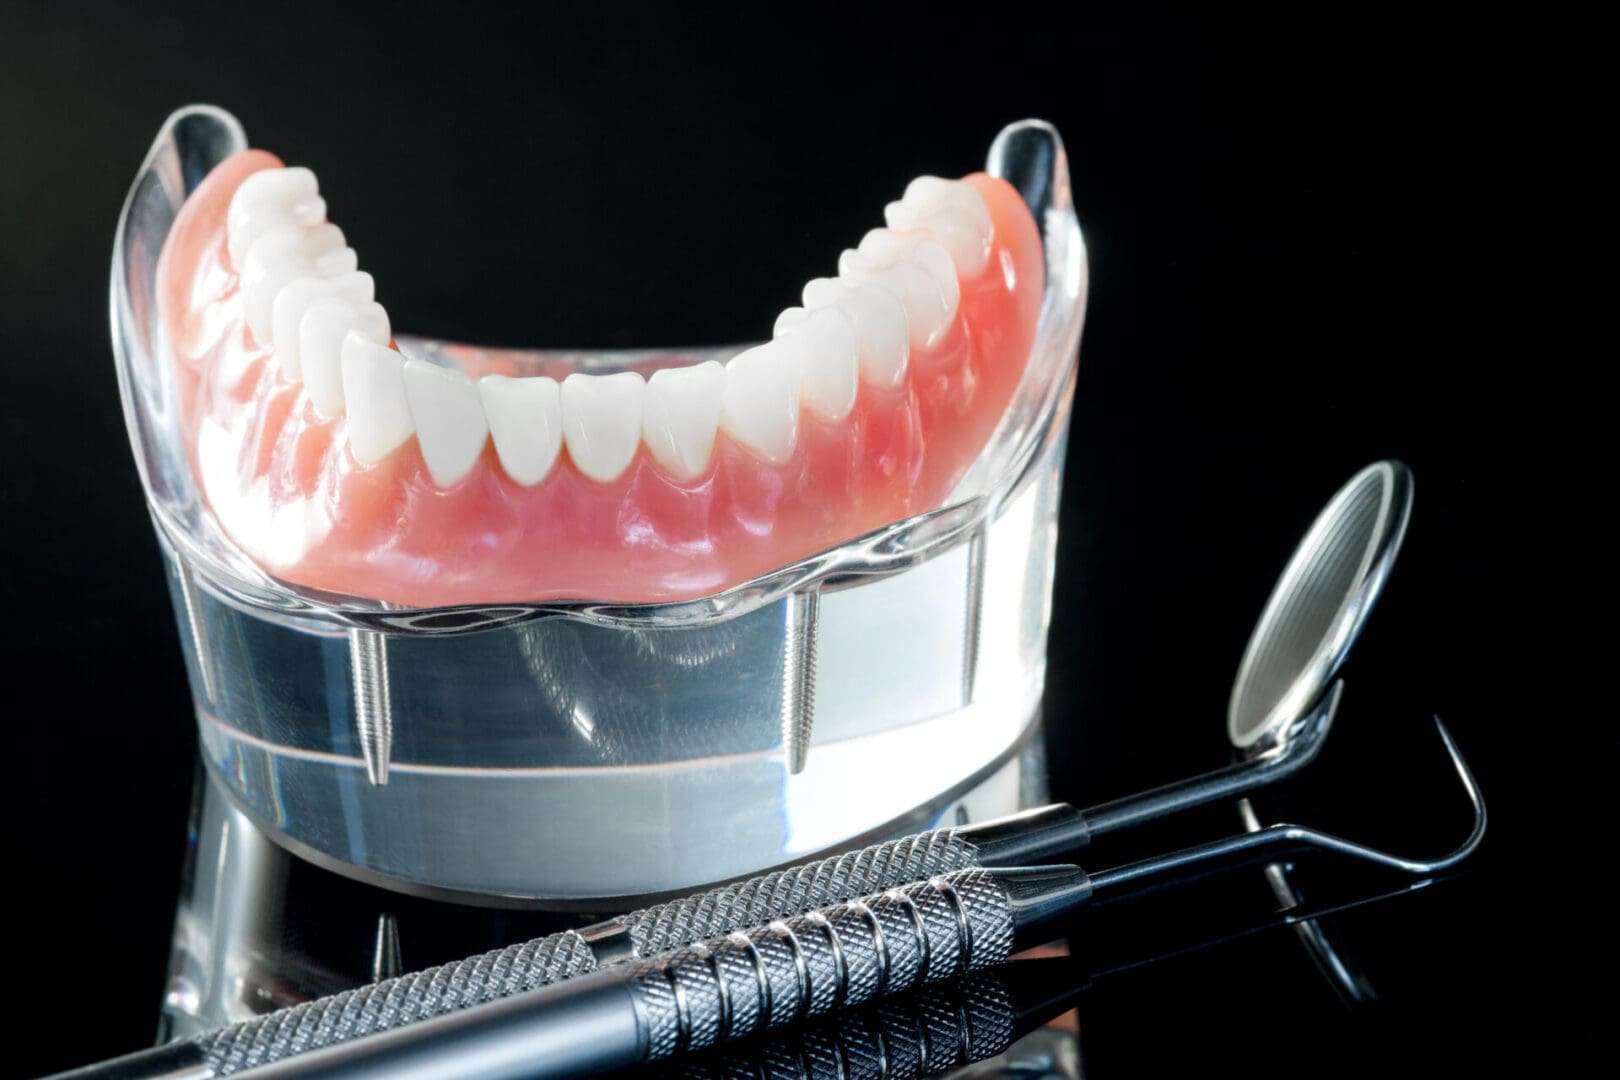 Allstar Implants Plus tooth implants for implant denture